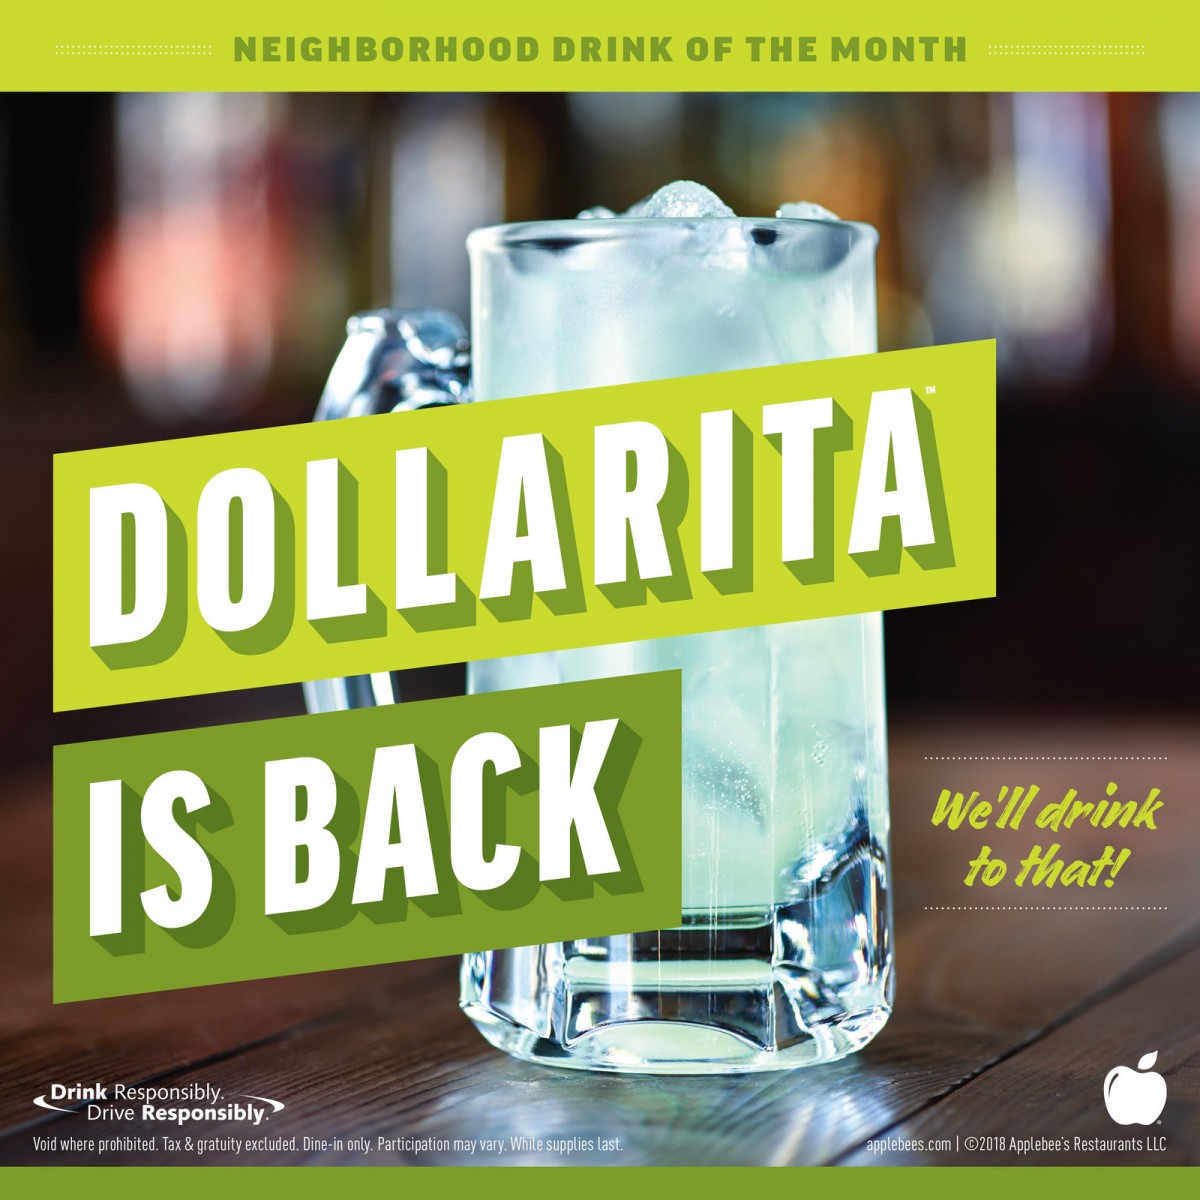 Applebee’s DOLLARITA is Back for the Month of April